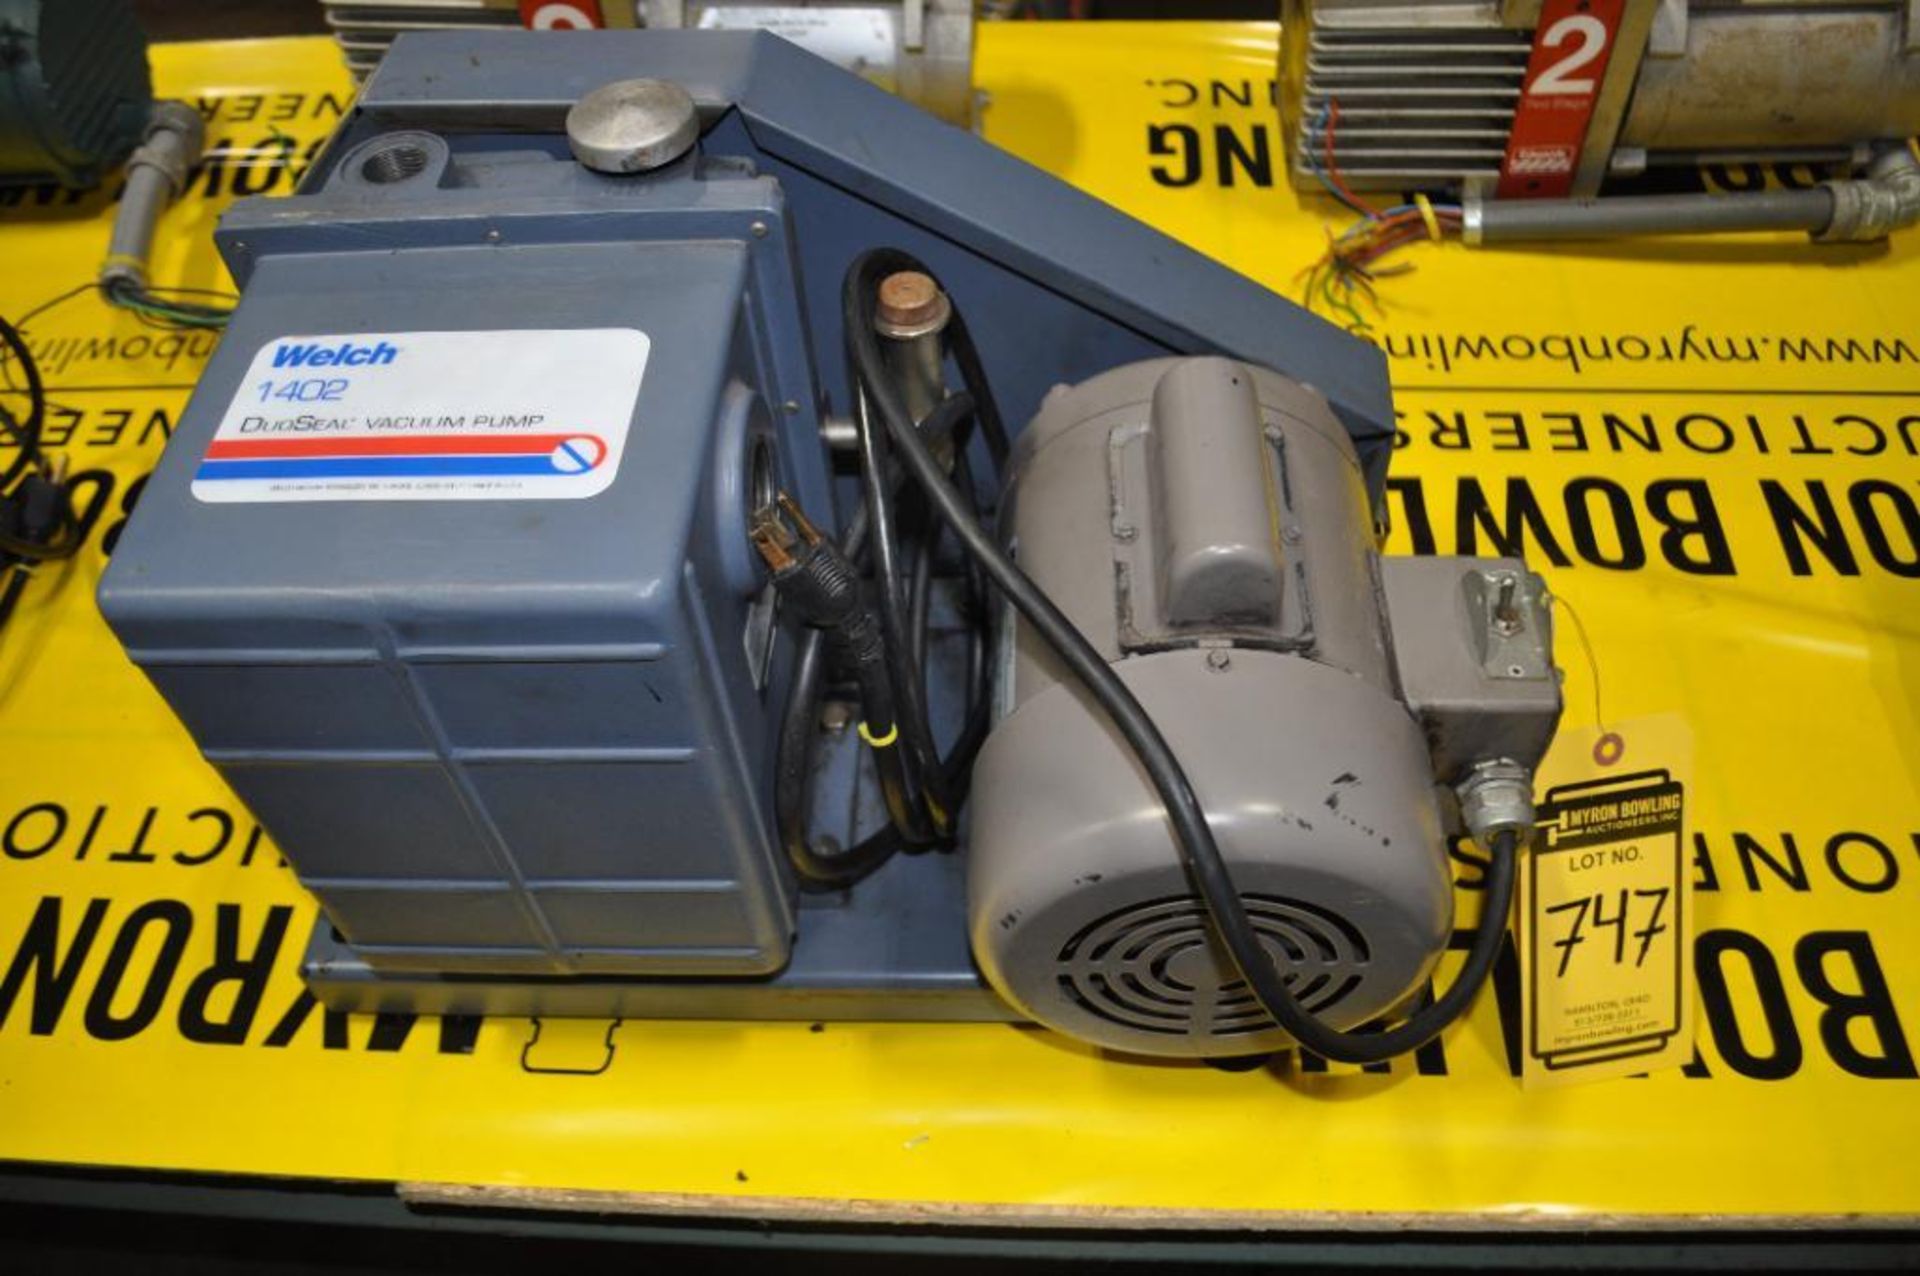 WELCH DUOSEAL VACUUM PUMP, MODEL: 1402, SINGLE PHASE